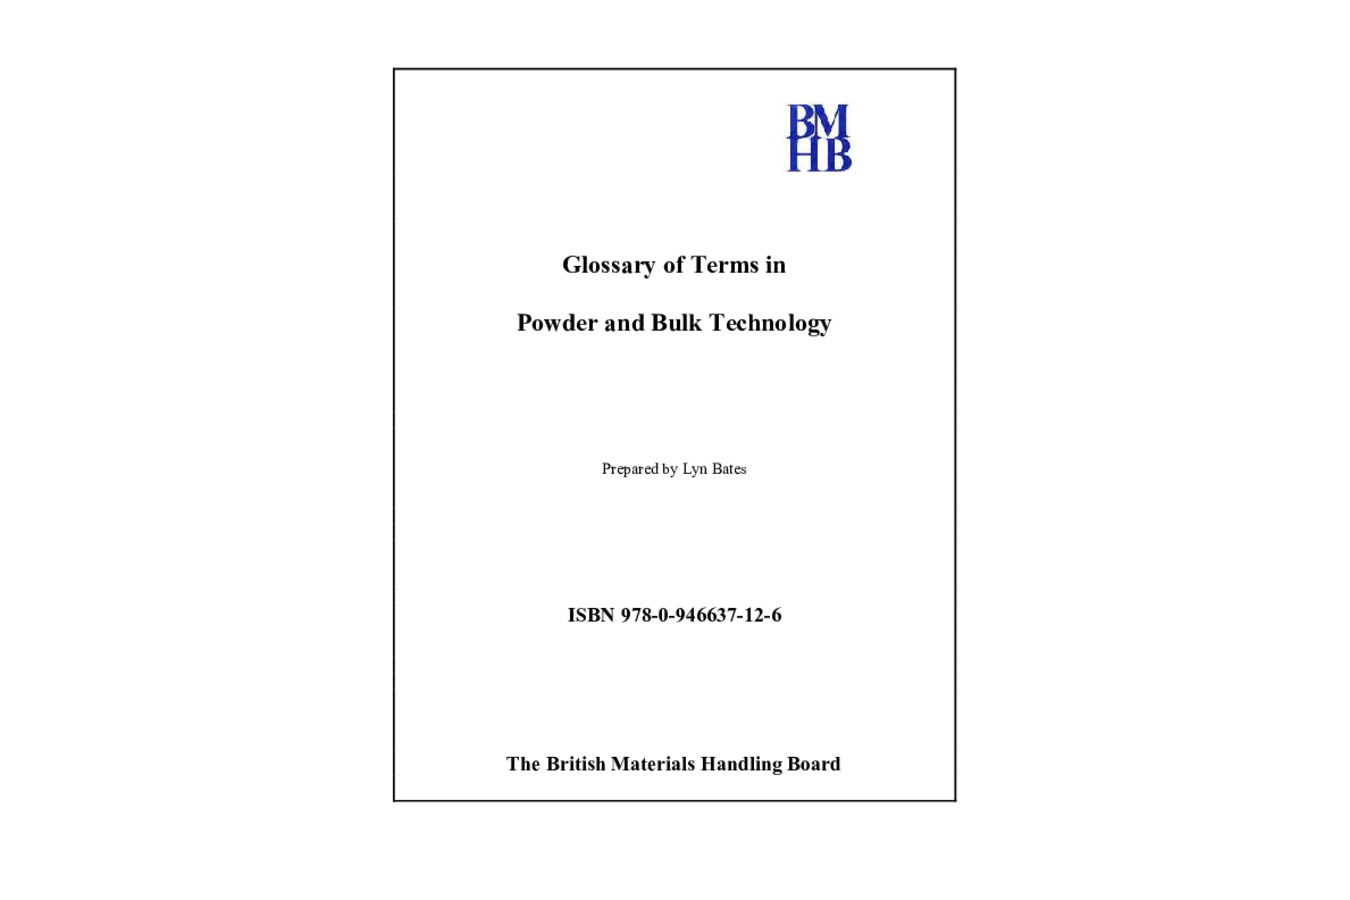 Glossary of Terms in Powder and Bulk Technology  An explanation of terms relating to particle technology as an introductory tool for non-specialists, newcomers and students in the field.